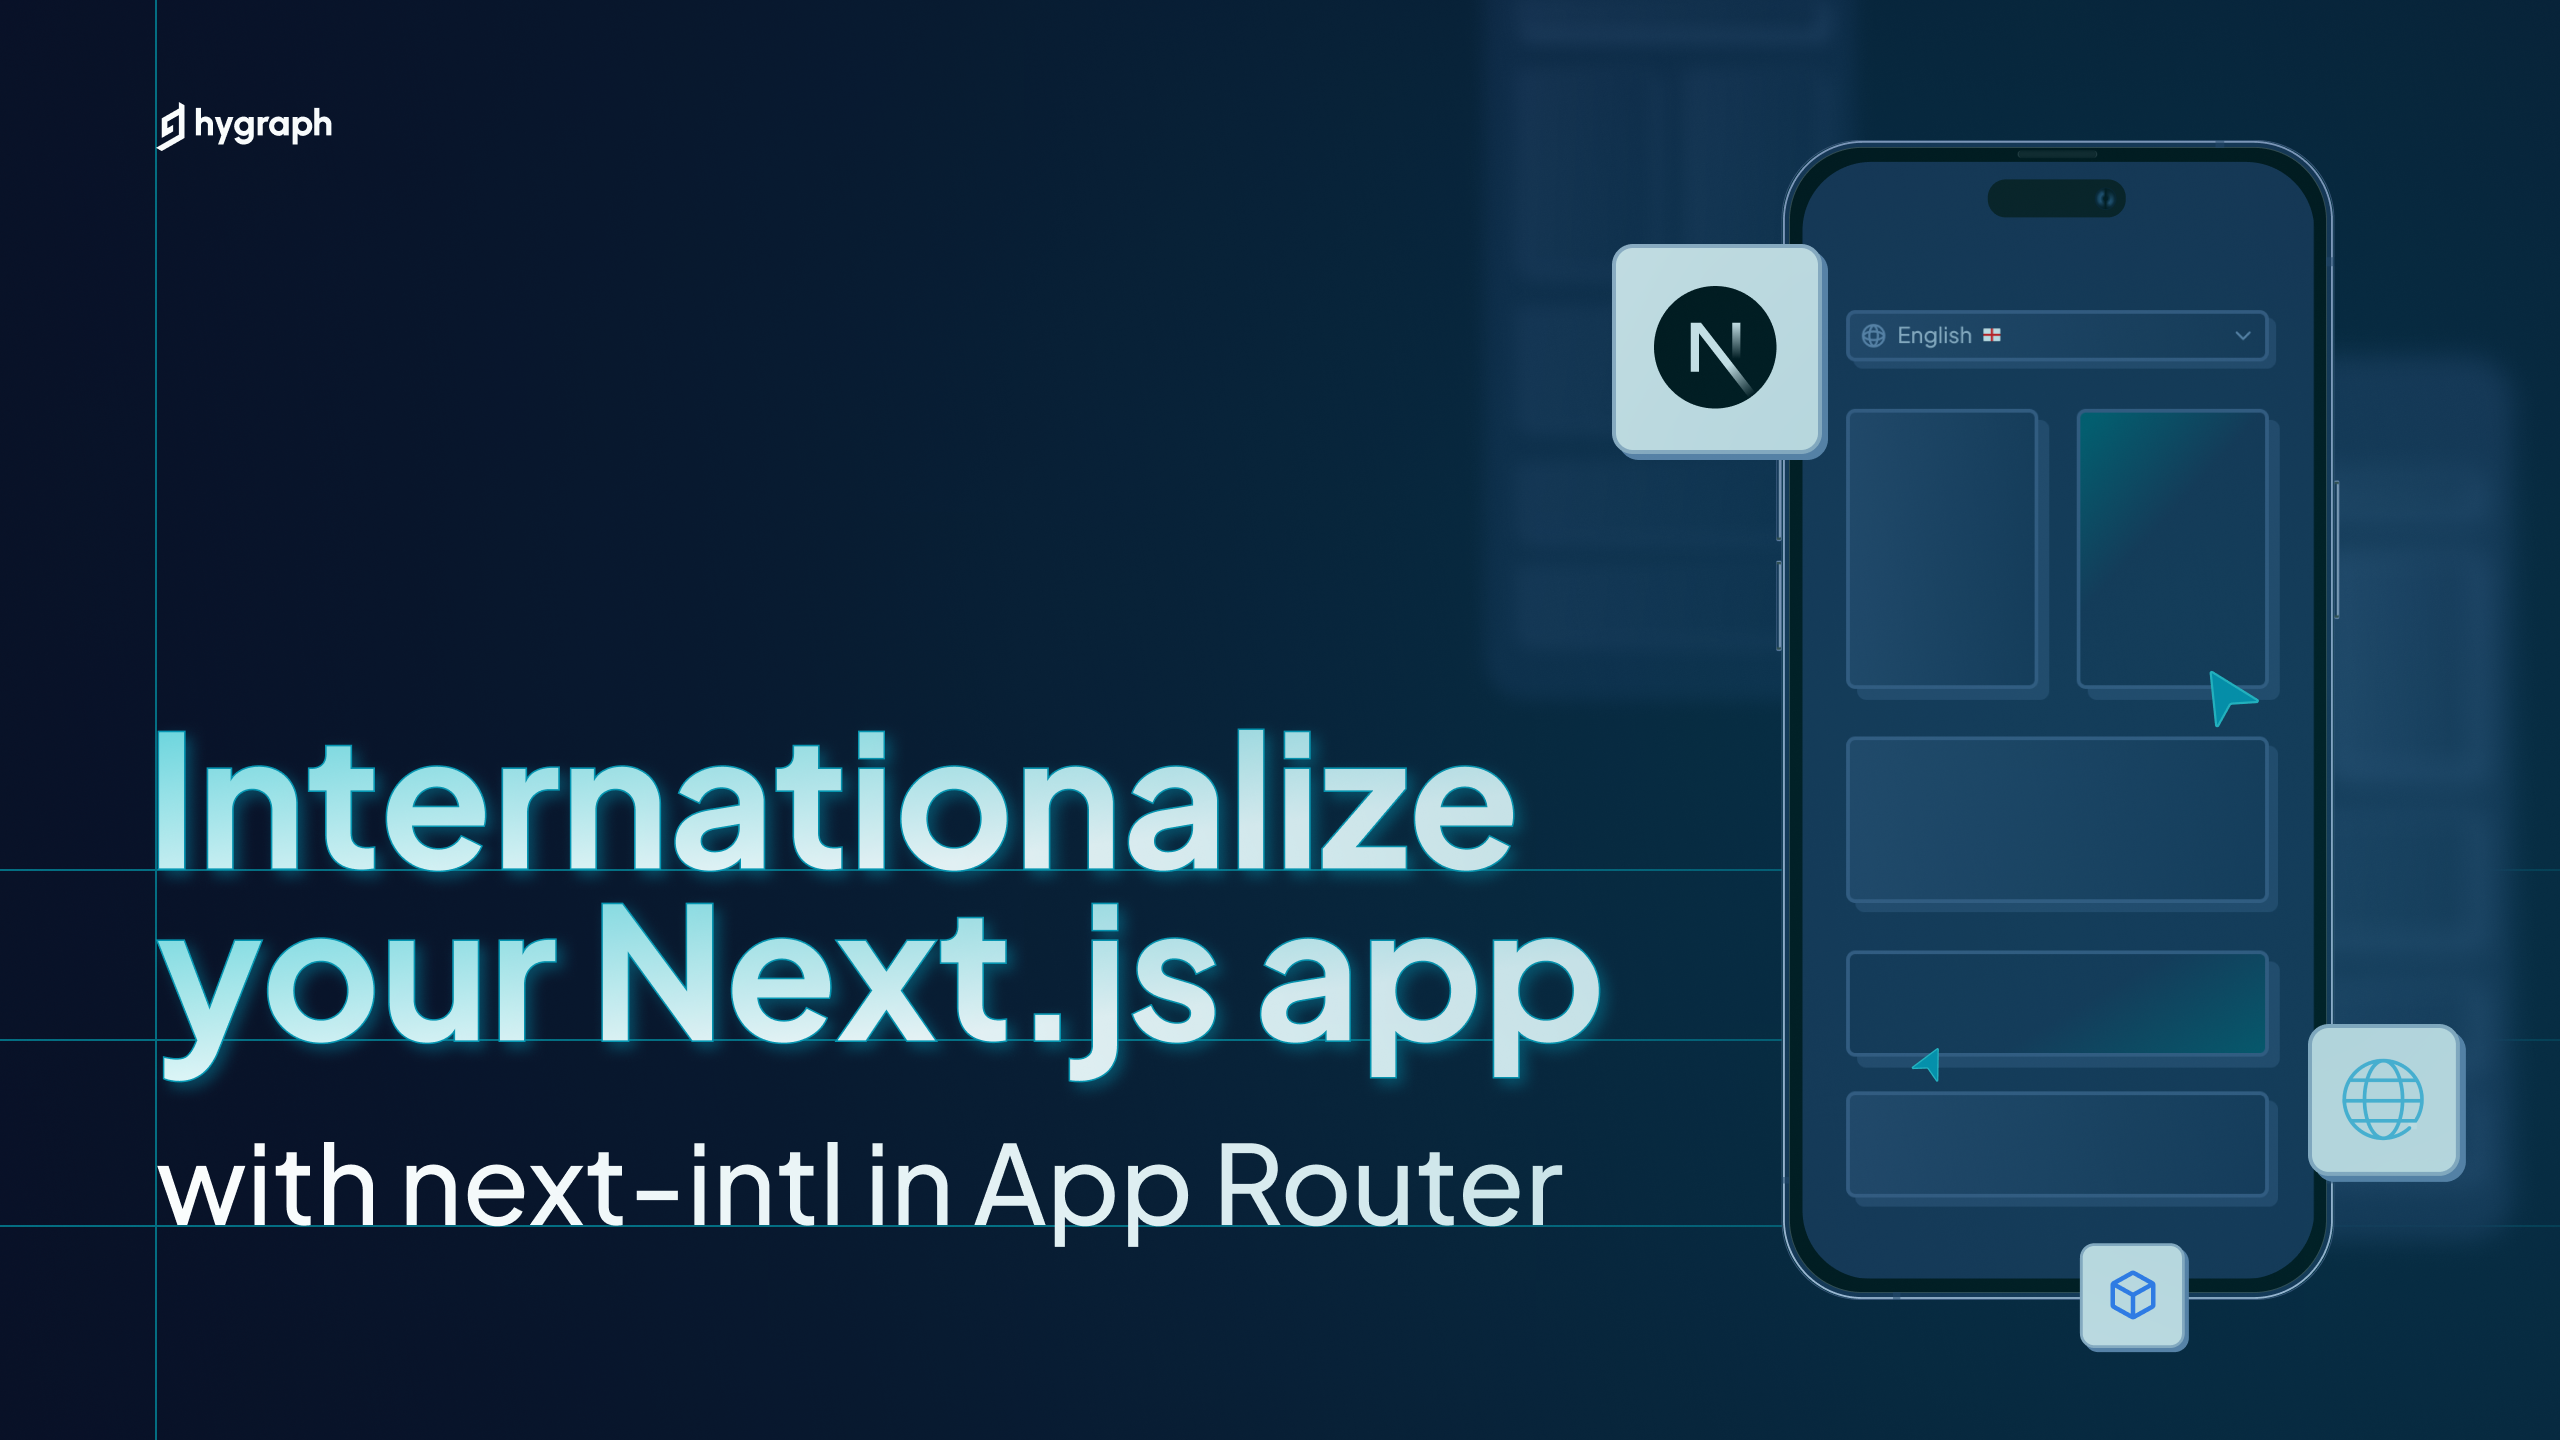 How to Internationalize your Next.js app with next-intl in App Router